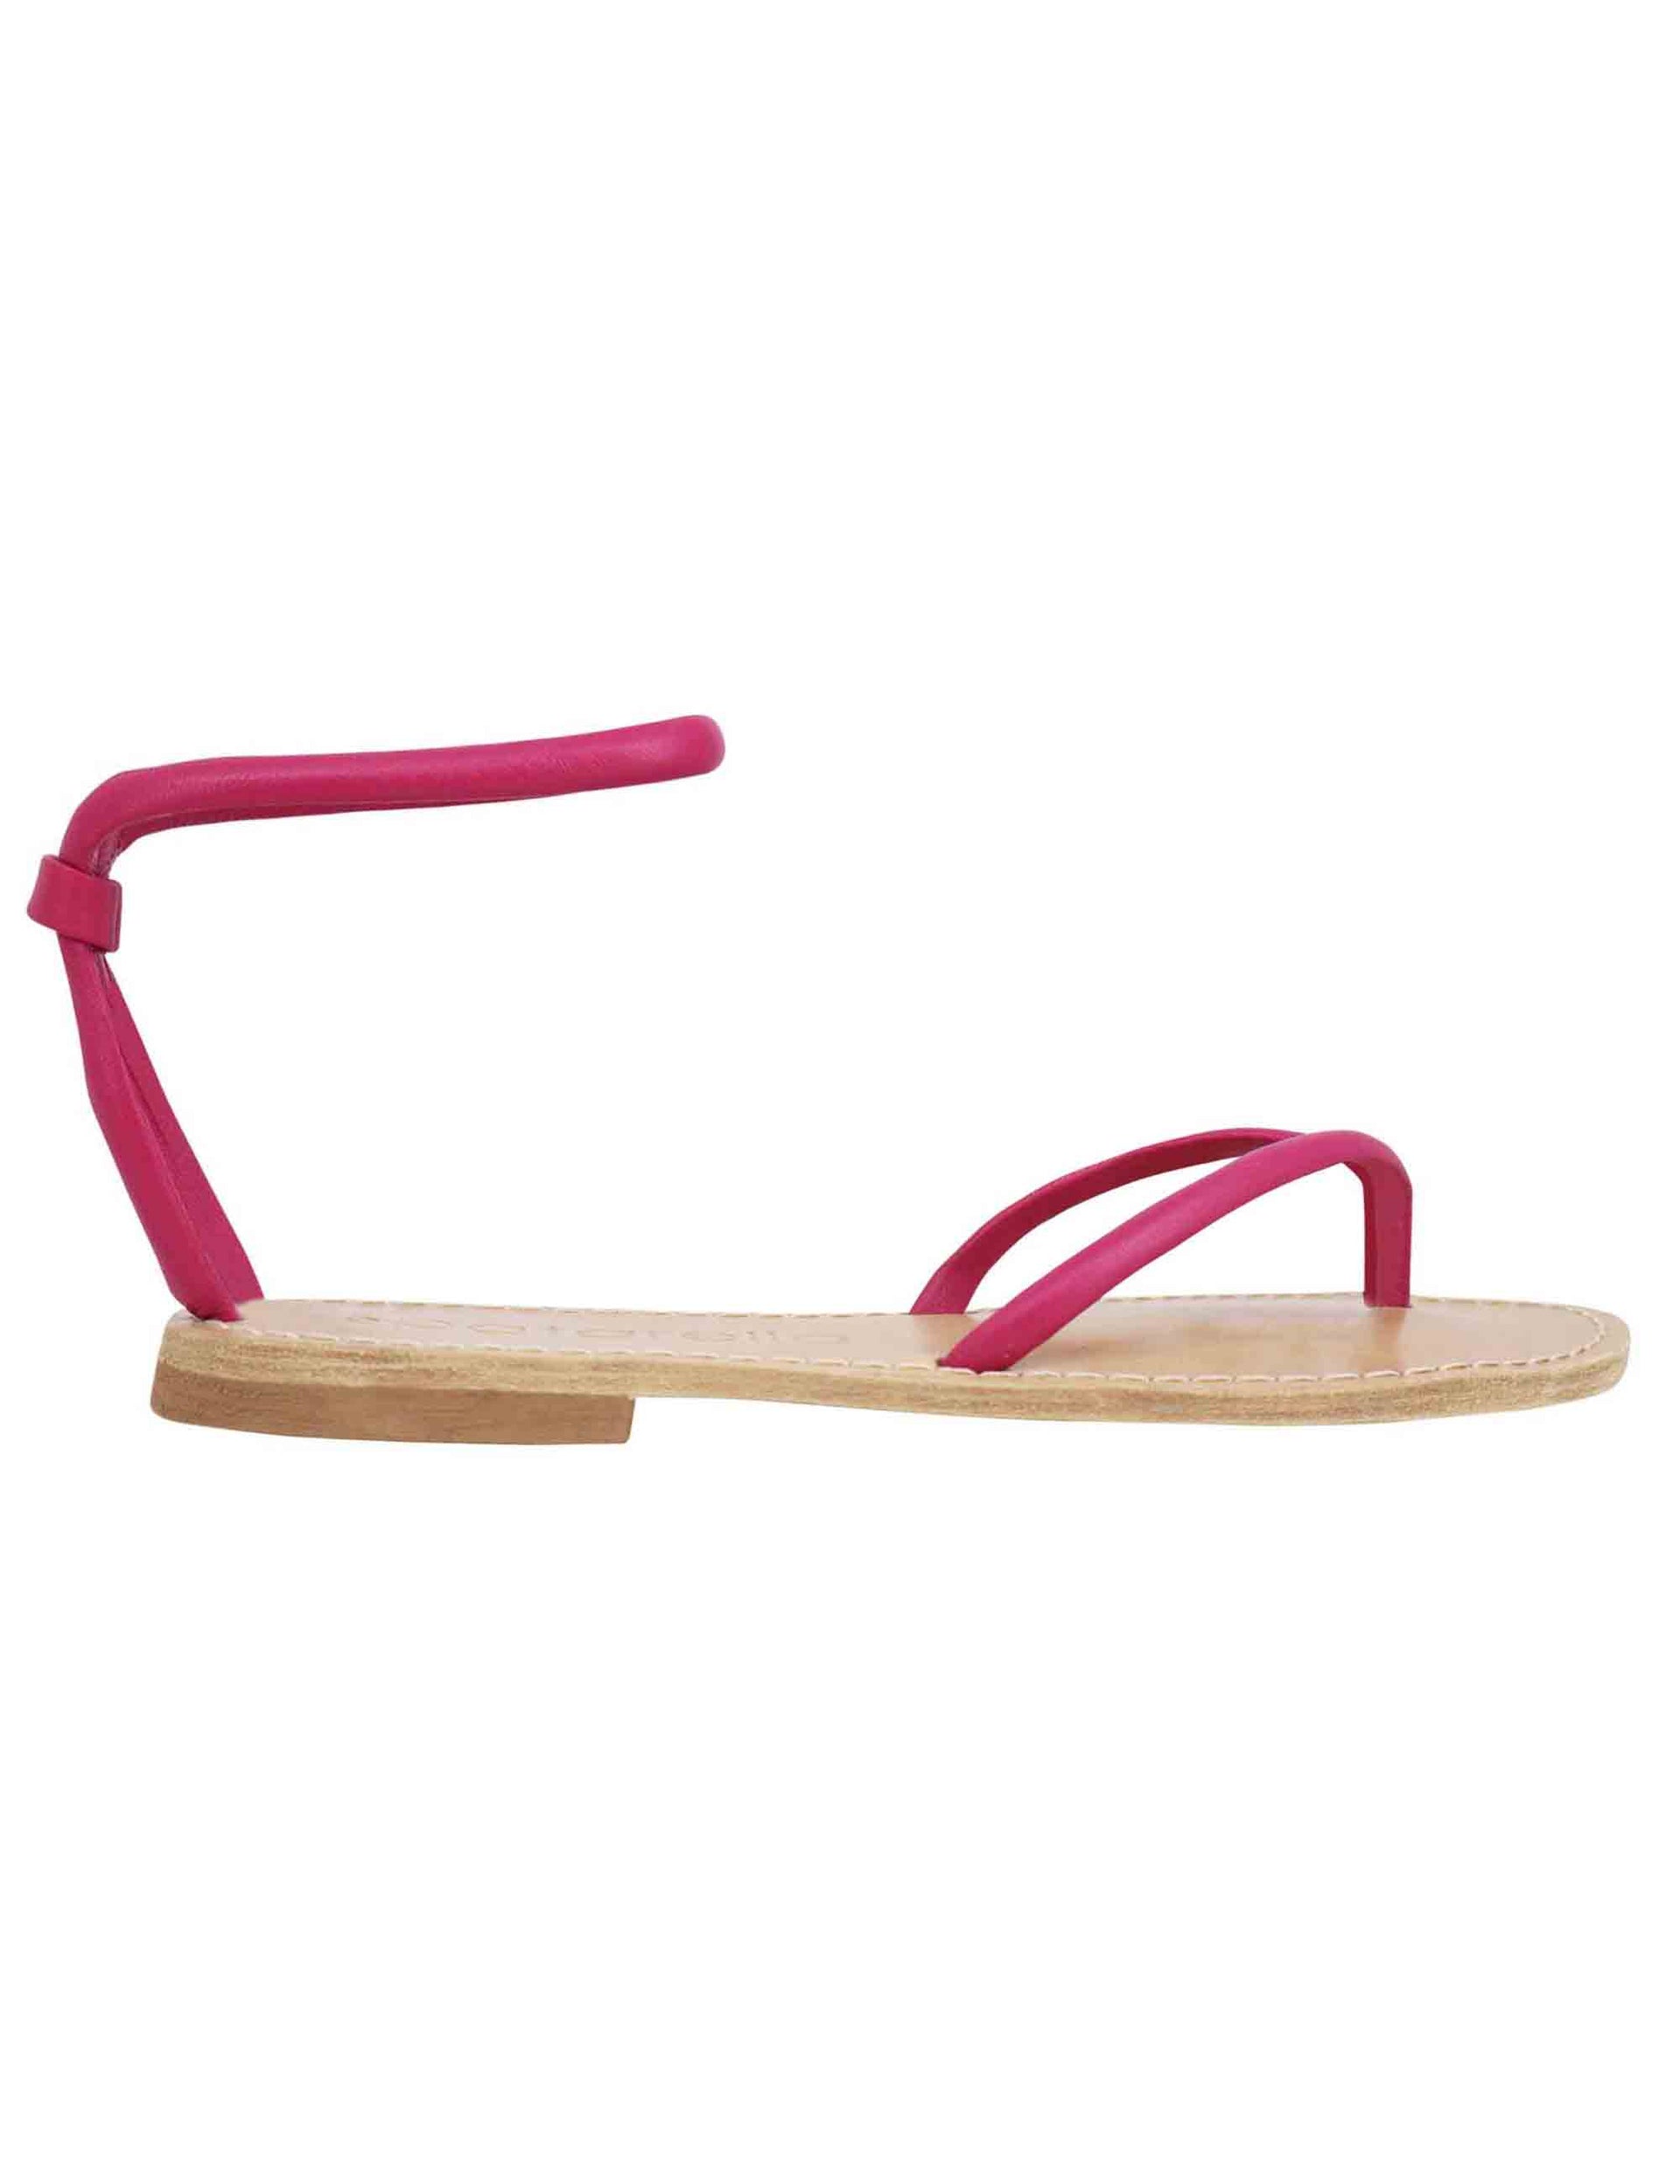 Women's flat flip-flop sandals in fuchsia leather with anklet